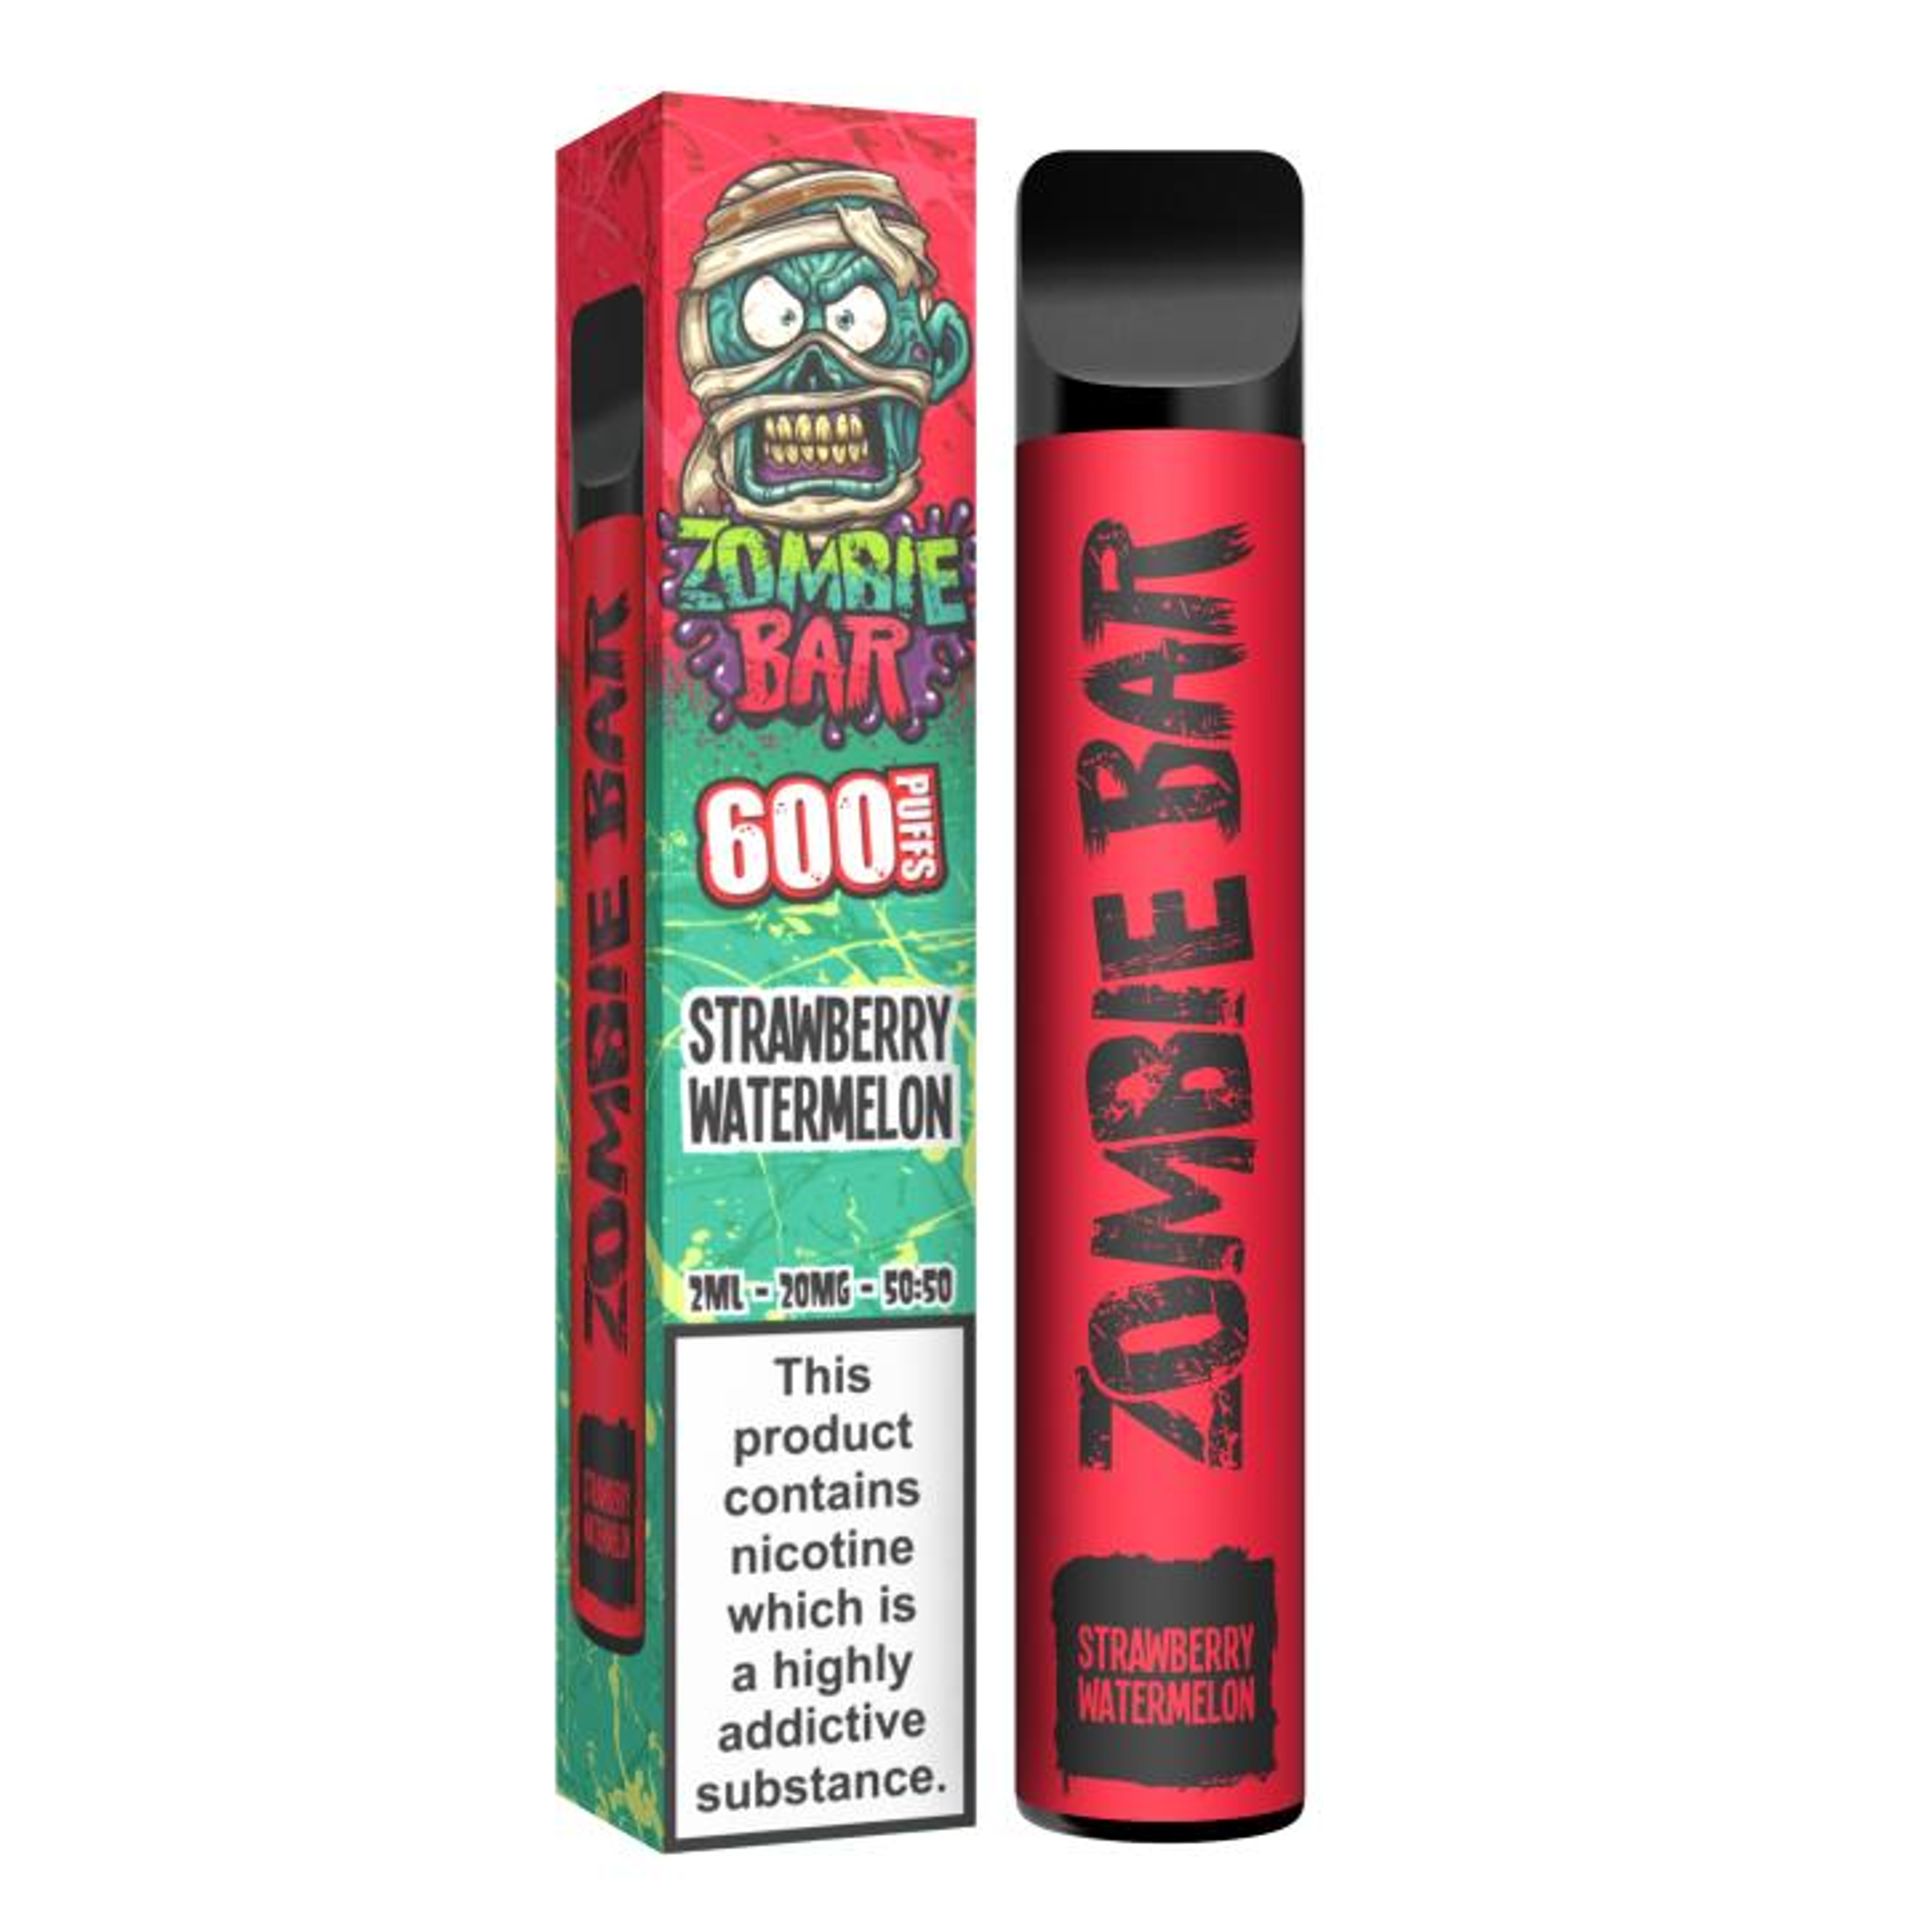 Image of Strawberry Watermelon by Zombie Bar